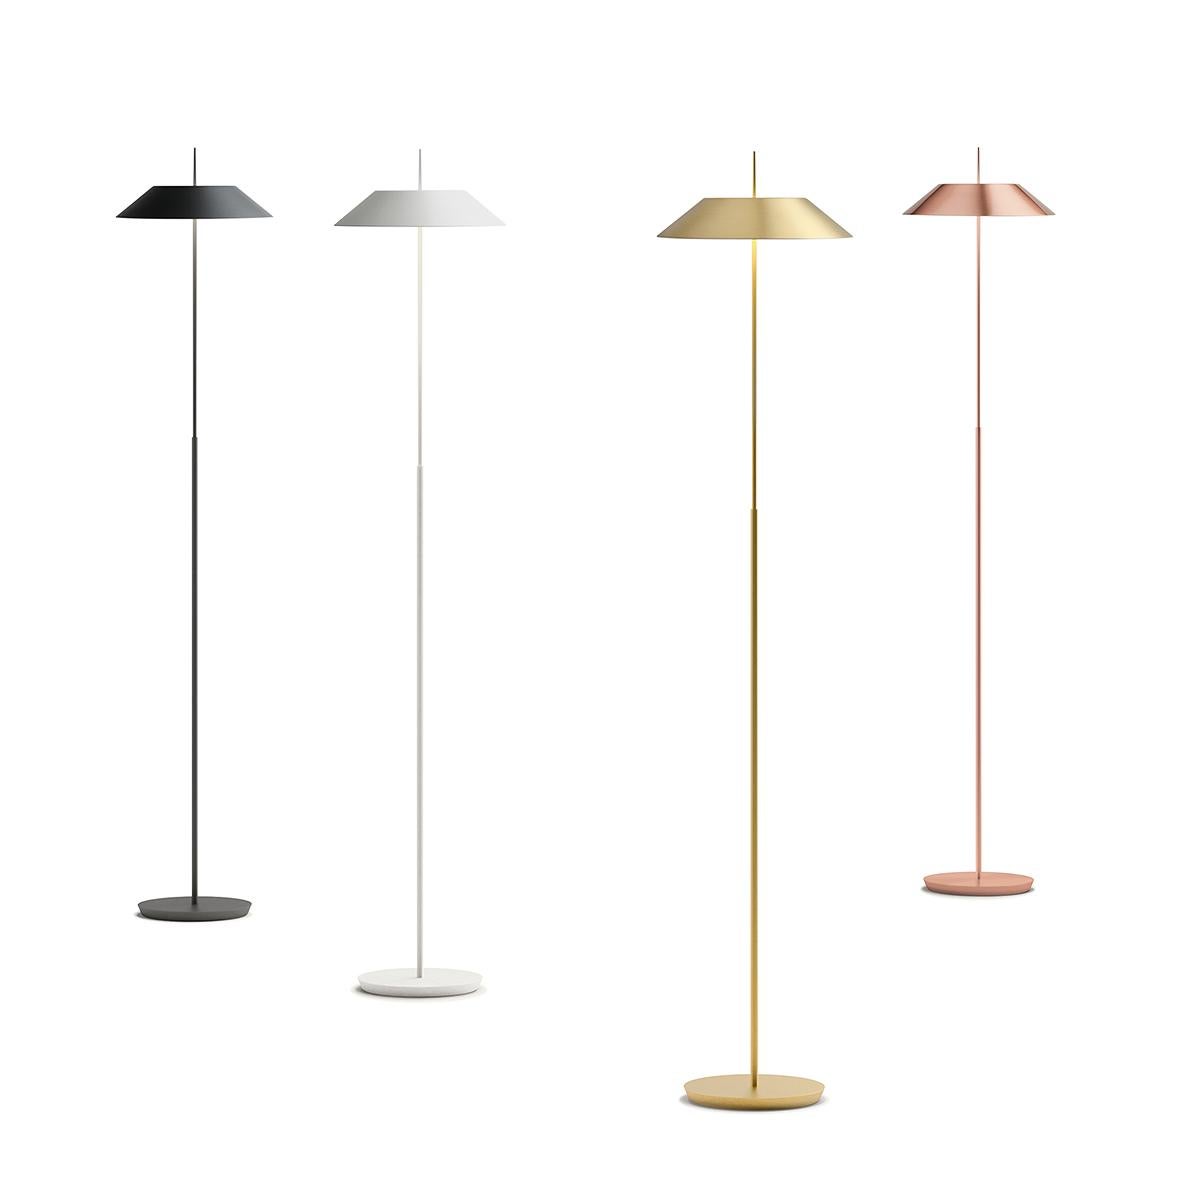 The Mayfair lamps are a Diego Fortunato design proposal. The entire Mayfair collection incorporates LED lighting and comes in various finishes: white, black, and copper.

Installation type: Surface mounted

Shade: Polycarbonate